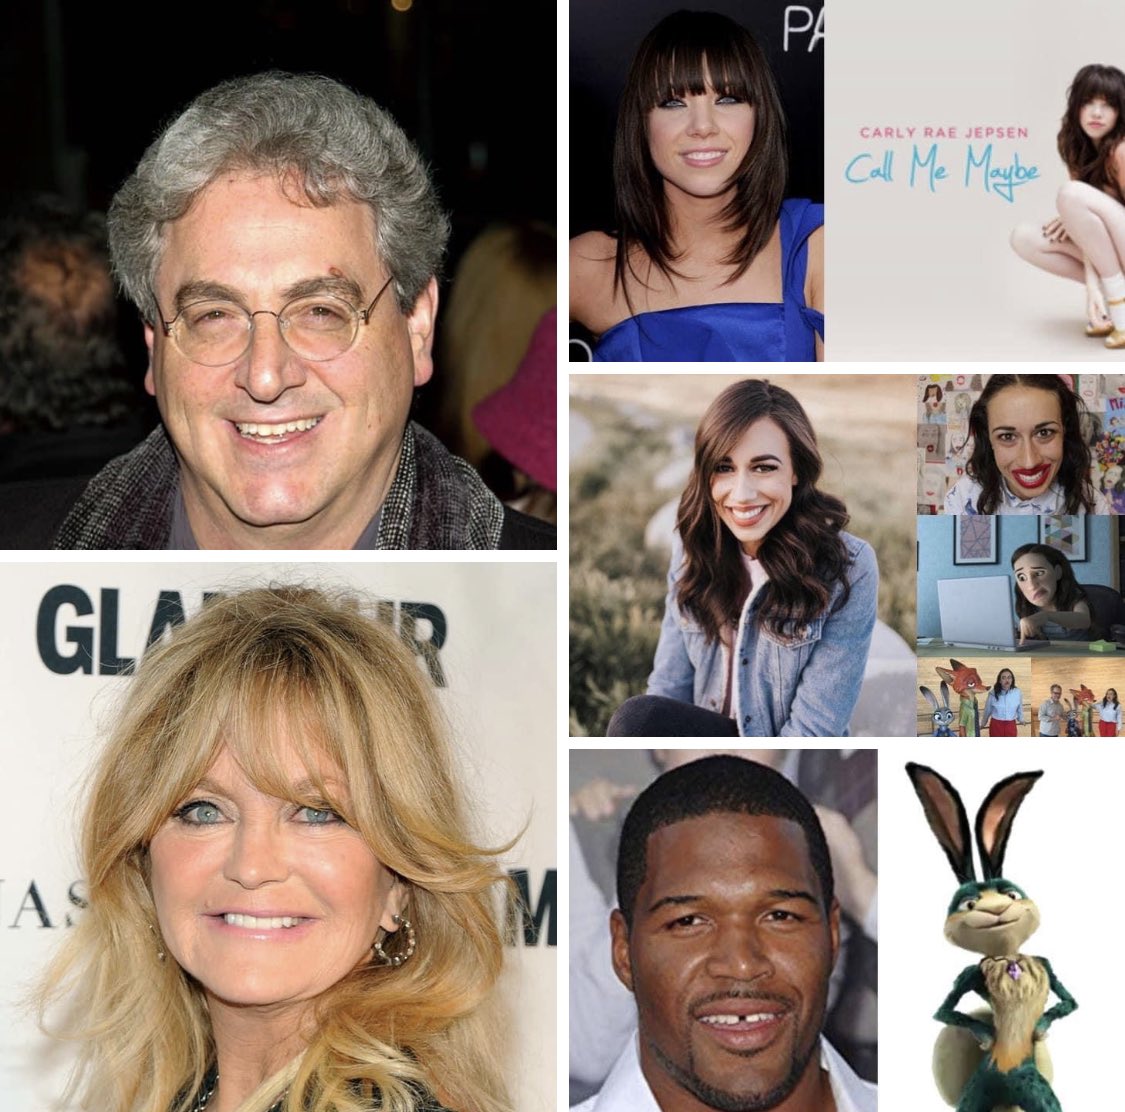 Happy birthday to Harold Ramis, Goldie Hawn, Carly Rae Jepsen, Colleen Ballinger, and Michael Strahan! 